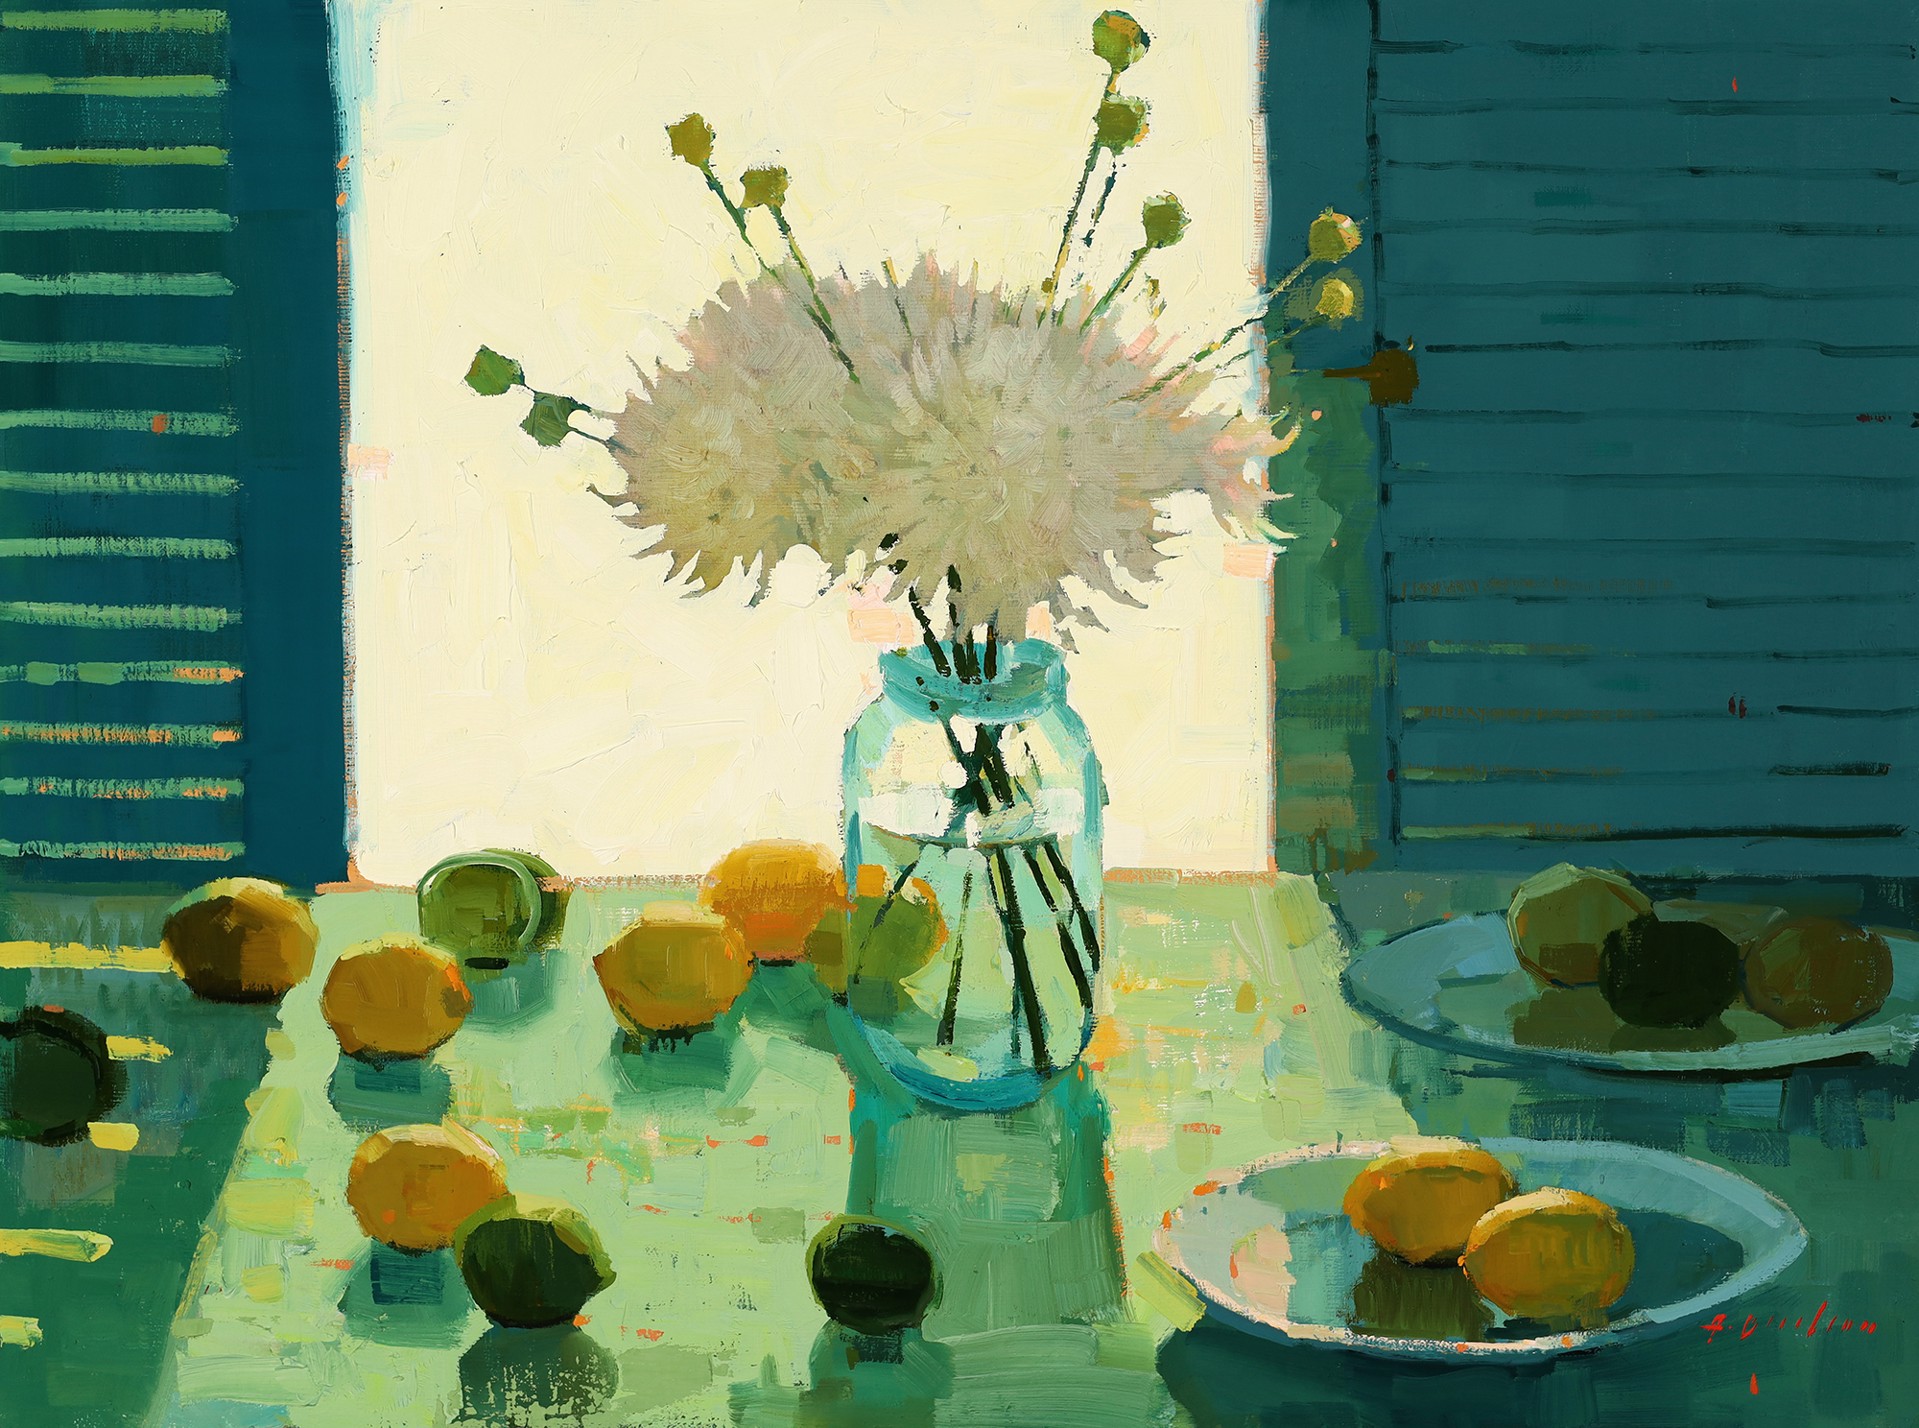 Lemons, Limes and Spider Mums by Aimee Erickson